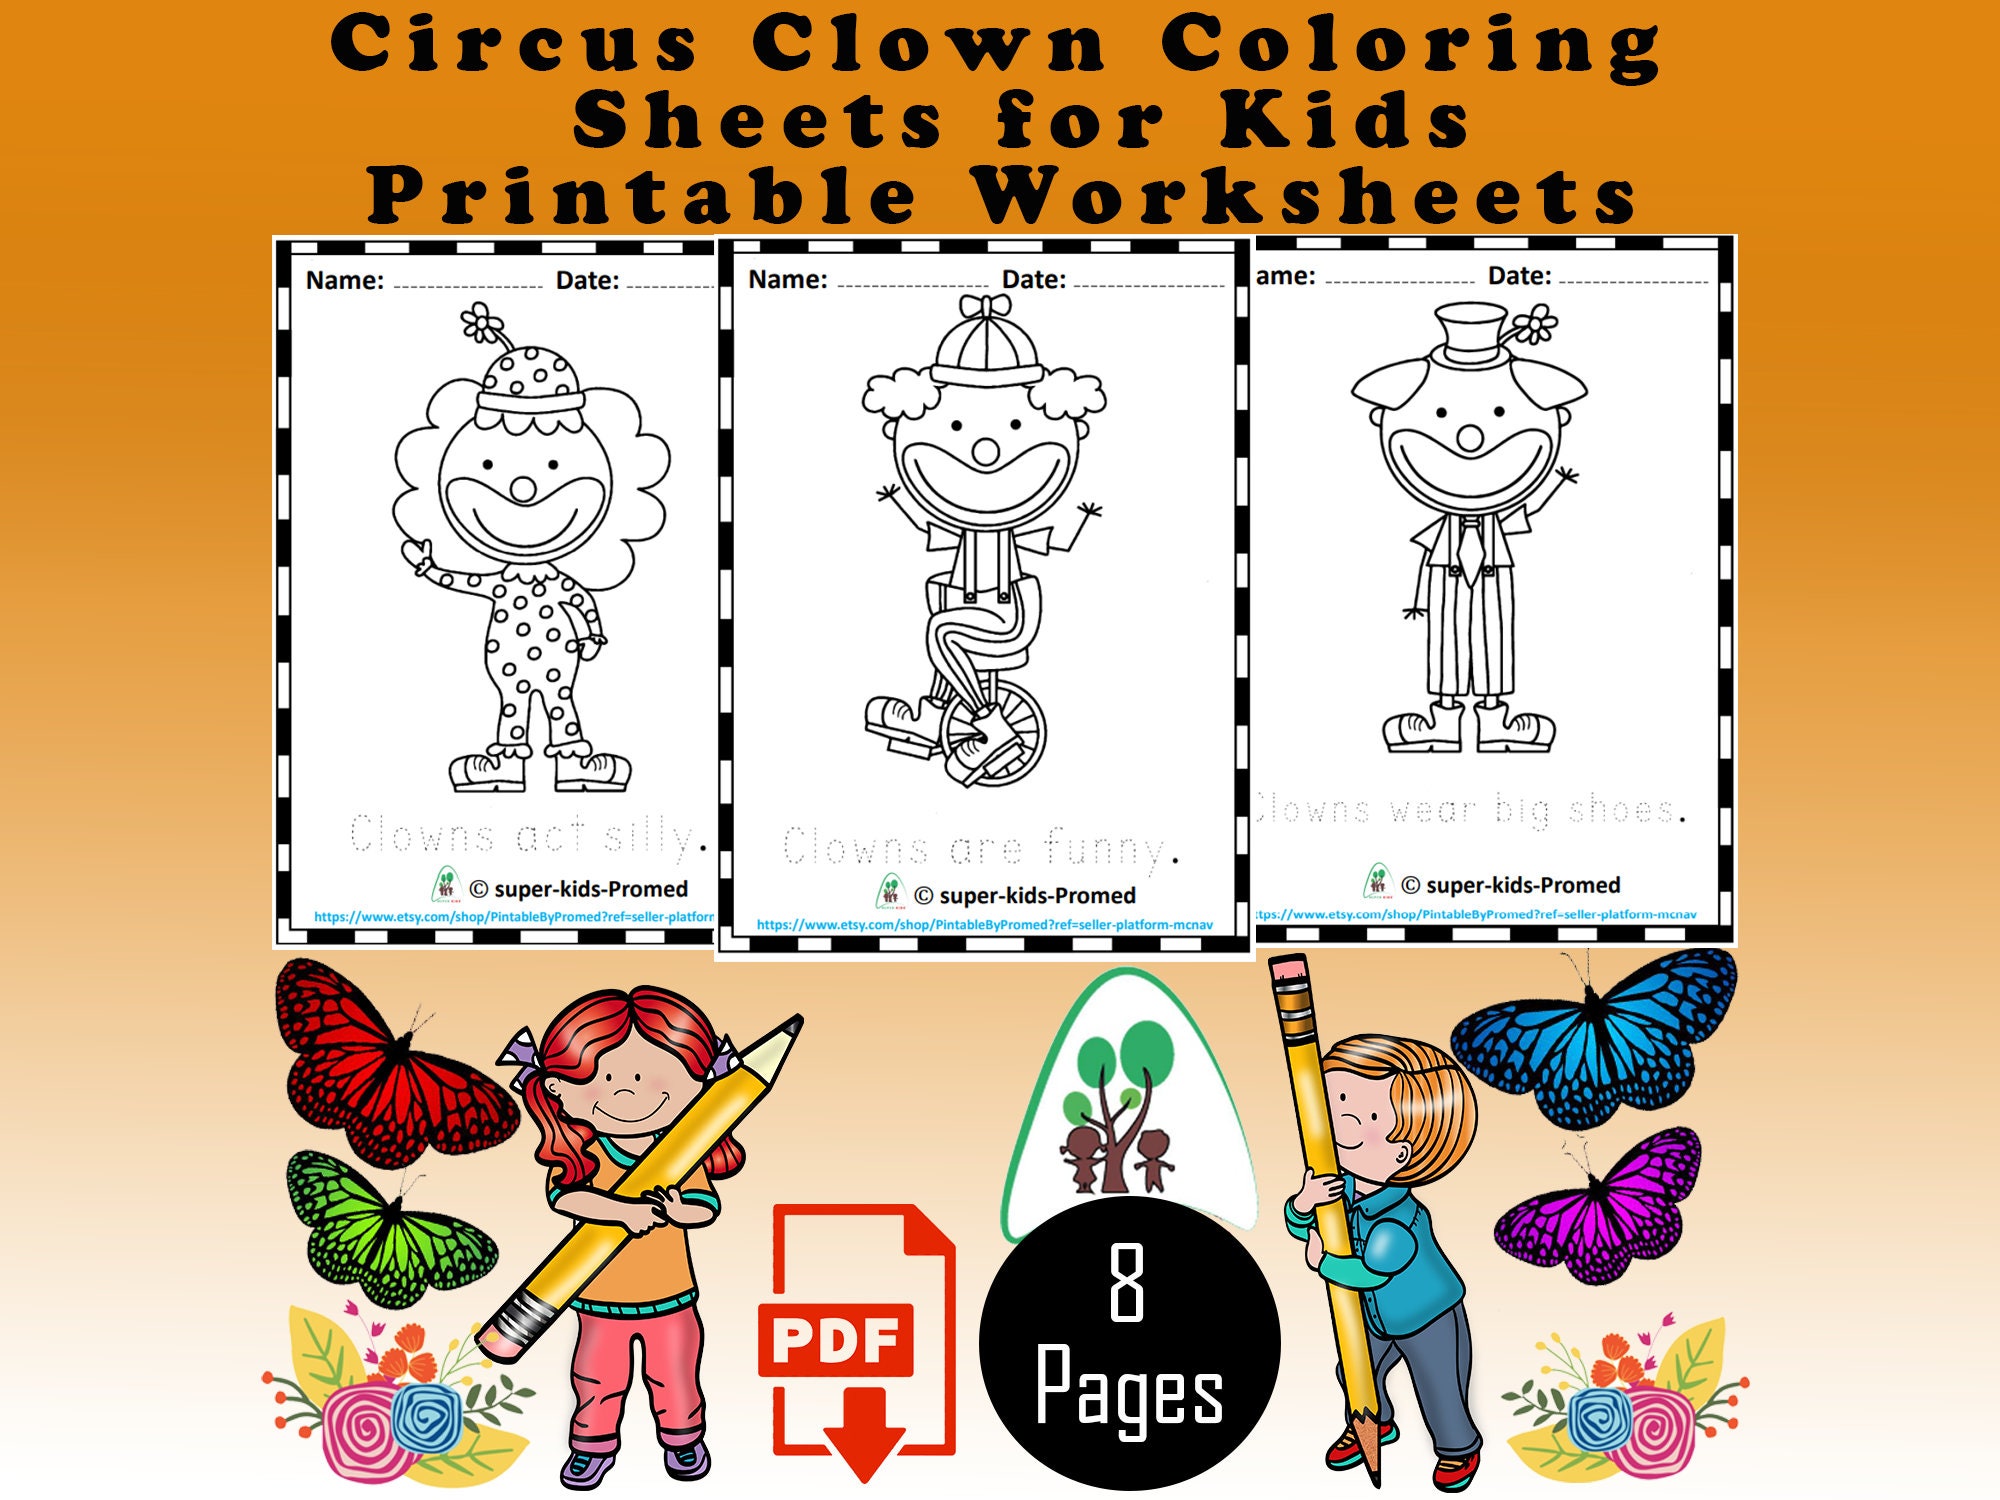 Circus clown coloring sheets for kids